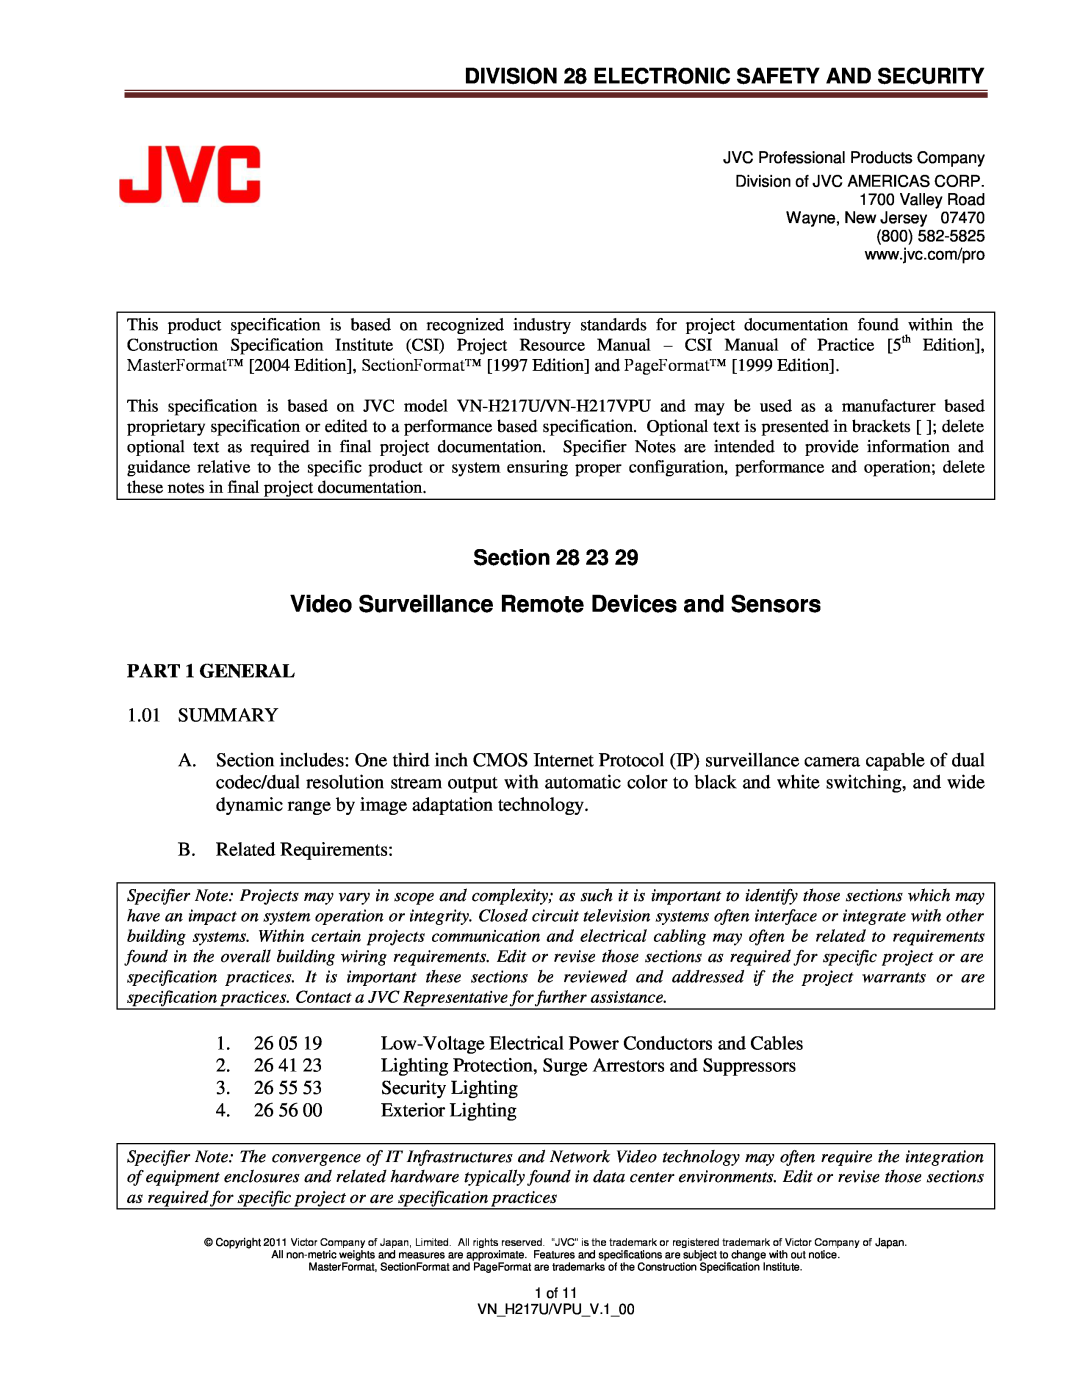 JVC VN-H217U specifications DIVISION 28 ELECTRONIC SAFETY AND SECURITY, 23, PART 1 GENERAL 